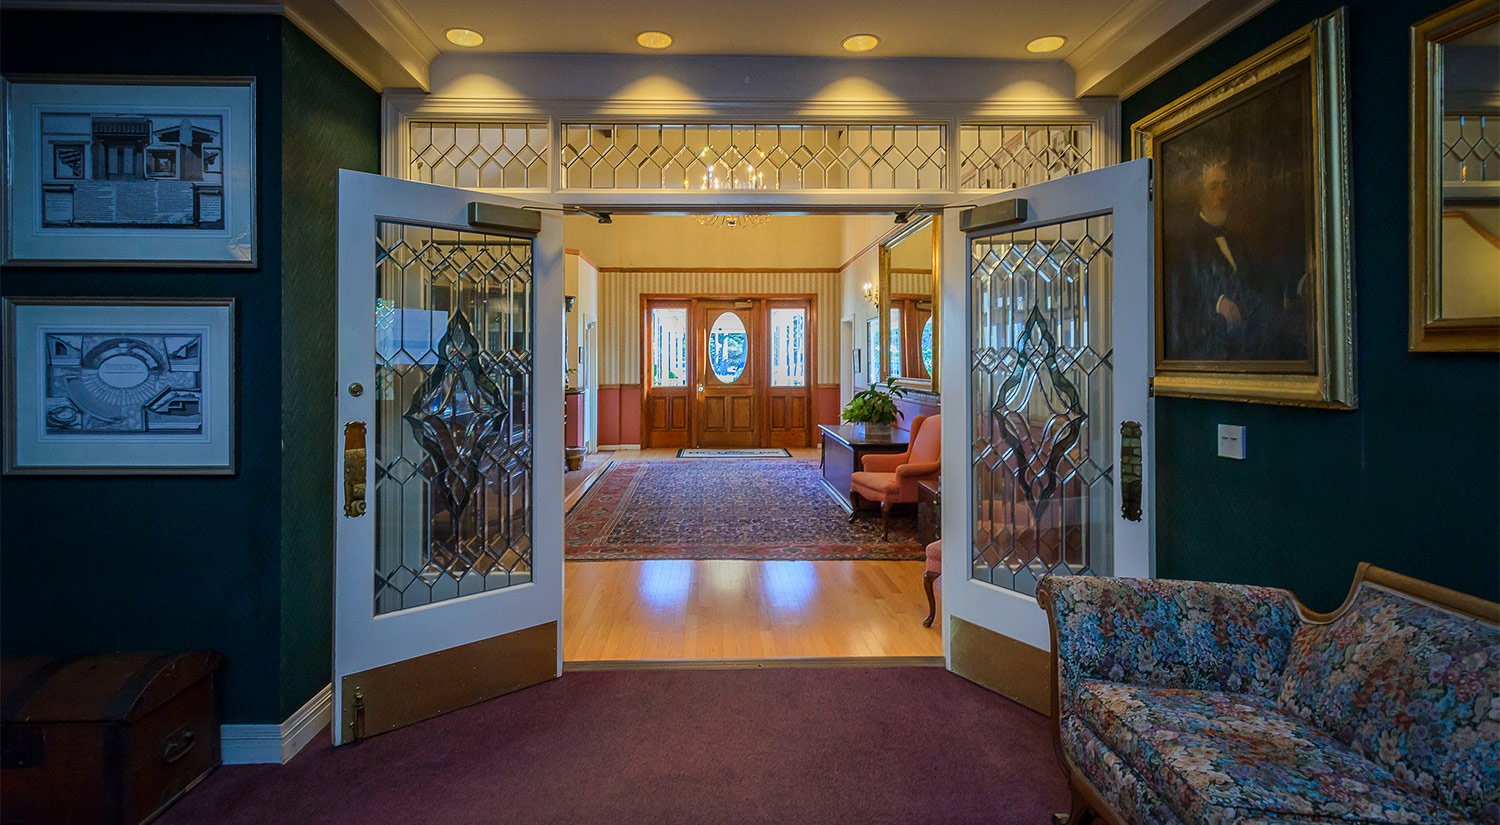 Stay At The Hill House Inn And Open The Doors To Your Mendocino Experience